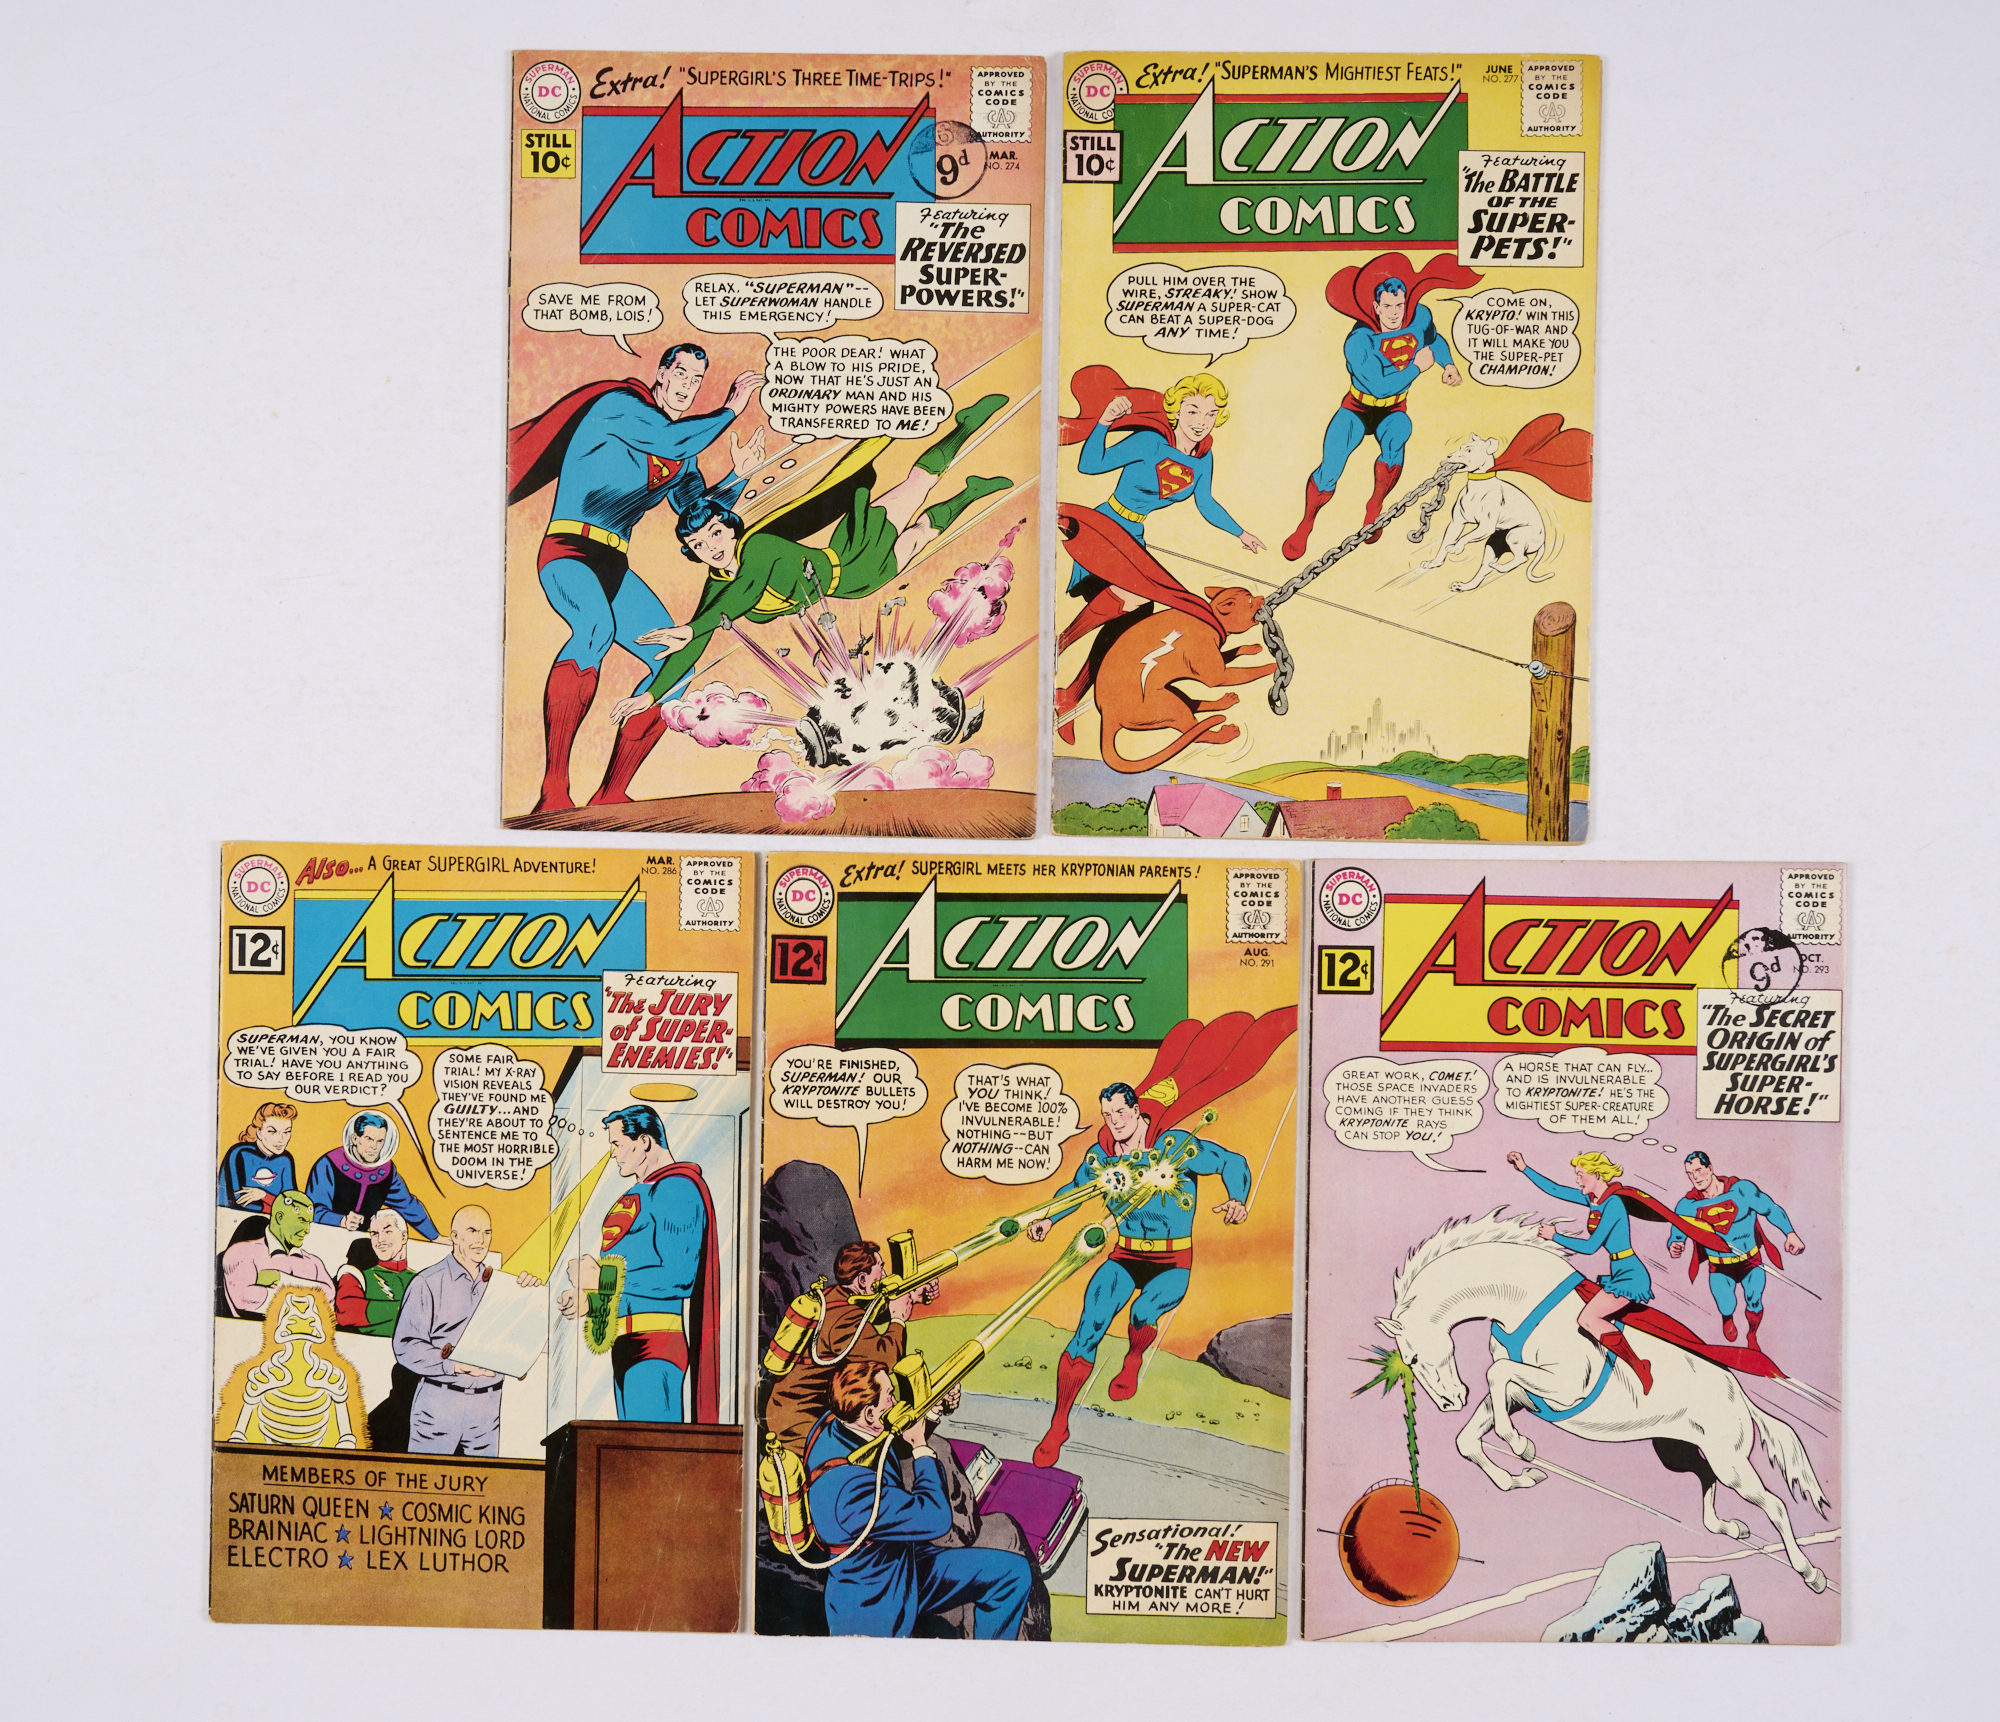 Action (1961-62) 274, 277, 286, 291, 293 (All cents bar # 277, 293). # 277, 291 [vg], 274, 286 [